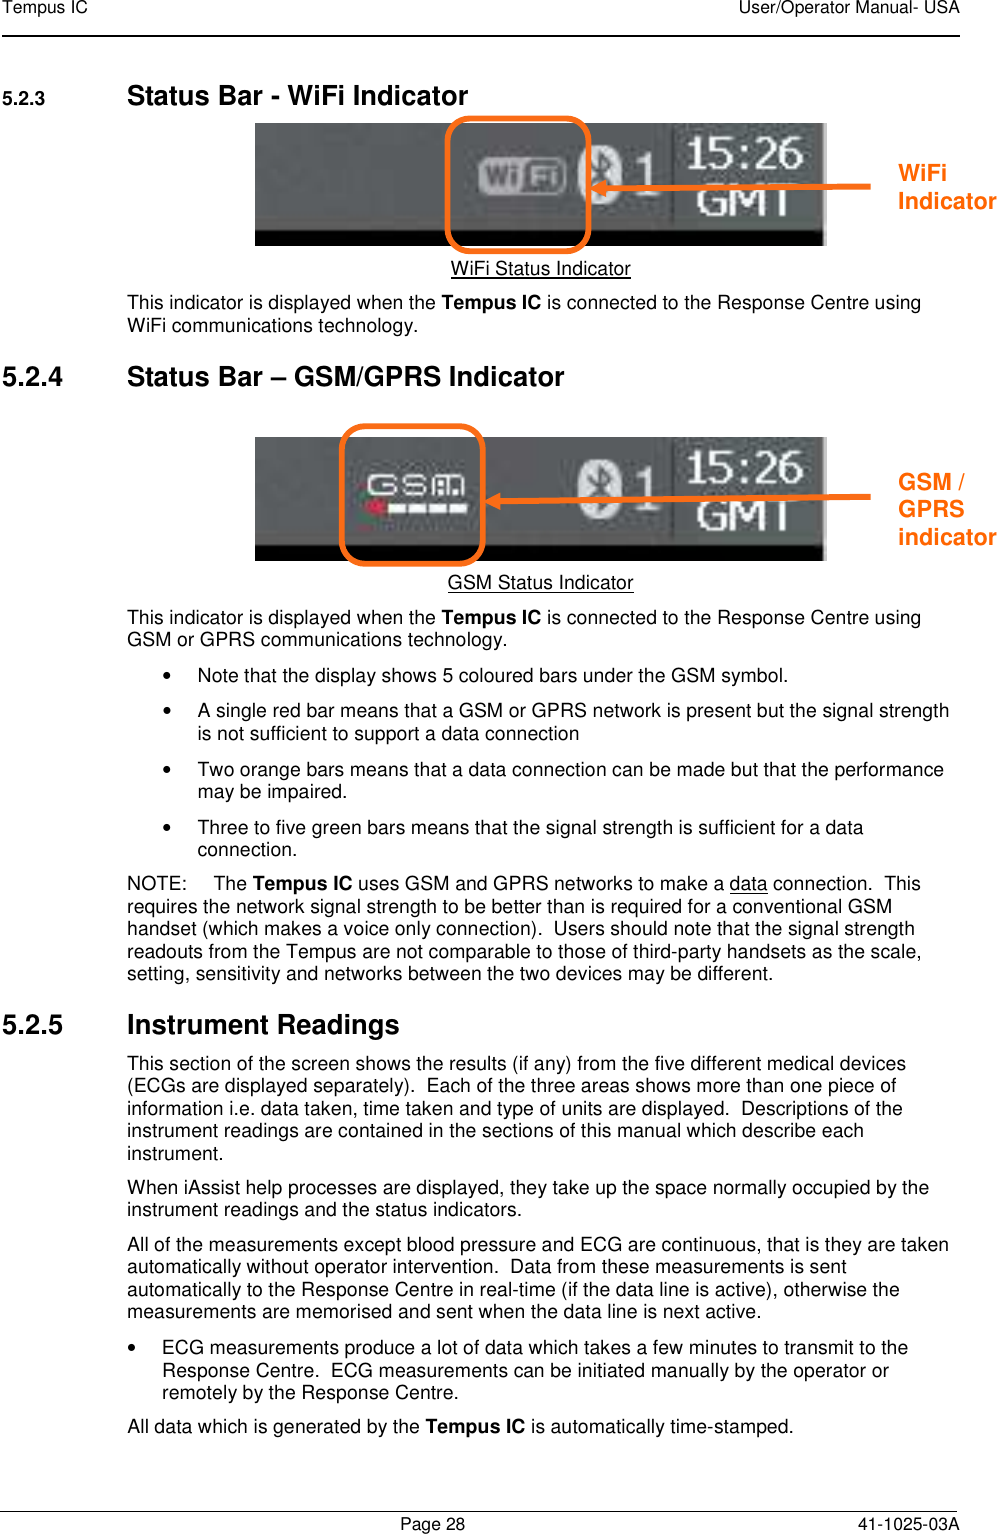 Tempus IC    User/Operator Manual- USA        Page 28  41-1025-03A 5.2.3 Status Bar - WiFi Indicator  WiFi Status Indicator This indicator is displayed when the Tempus IC is connected to the Response Centre using WiFi communications technology. 5.2.4  Status Bar – GSM/GPRS Indicator   GSM Status Indicator This indicator is displayed when the Tempus IC is connected to the Response Centre using GSM or GPRS communications technology. •  Note that the display shows 5 coloured bars under the GSM symbol.   •  A single red bar means that a GSM or GPRS network is present but the signal strength is not sufficient to support a data connection •  Two orange bars means that a data connection can be made but that the performance may be impaired. •  Three to five green bars means that the signal strength is sufficient for a data connection. NOTE:  The Tempus IC uses GSM and GPRS networks to make a data connection.  This requires the network signal strength to be better than is required for a conventional GSM handset (which makes a voice only connection).  Users should note that the signal strength readouts from the Tempus are not comparable to those of third-party handsets as the scale, setting, sensitivity and networks between the two devices may be different. 5.2.5  Instrument Readings This section of the screen shows the results (if any) from the five different medical devices (ECGs are displayed separately).  Each of the three areas shows more than one piece of information i.e. data taken, time taken and type of units are displayed.  Descriptions of the instrument readings are contained in the sections of this manual which describe each instrument. When iAssist help processes are displayed, they take up the space normally occupied by the instrument readings and the status indicators. All of the measurements except blood pressure and ECG are continuous, that is they are taken automatically without operator intervention.  Data from these measurements is sent automatically to the Response Centre in real-time (if the data line is active), otherwise the measurements are memorised and sent when the data line is next active. •  ECG measurements produce a lot of data which takes a few minutes to transmit to the Response Centre.  ECG measurements can be initiated manually by the operator or remotely by the Response Centre. All data which is generated by the Tempus IC is automatically time-stamped. WiFi Indicator GSM / GPRS indicator 